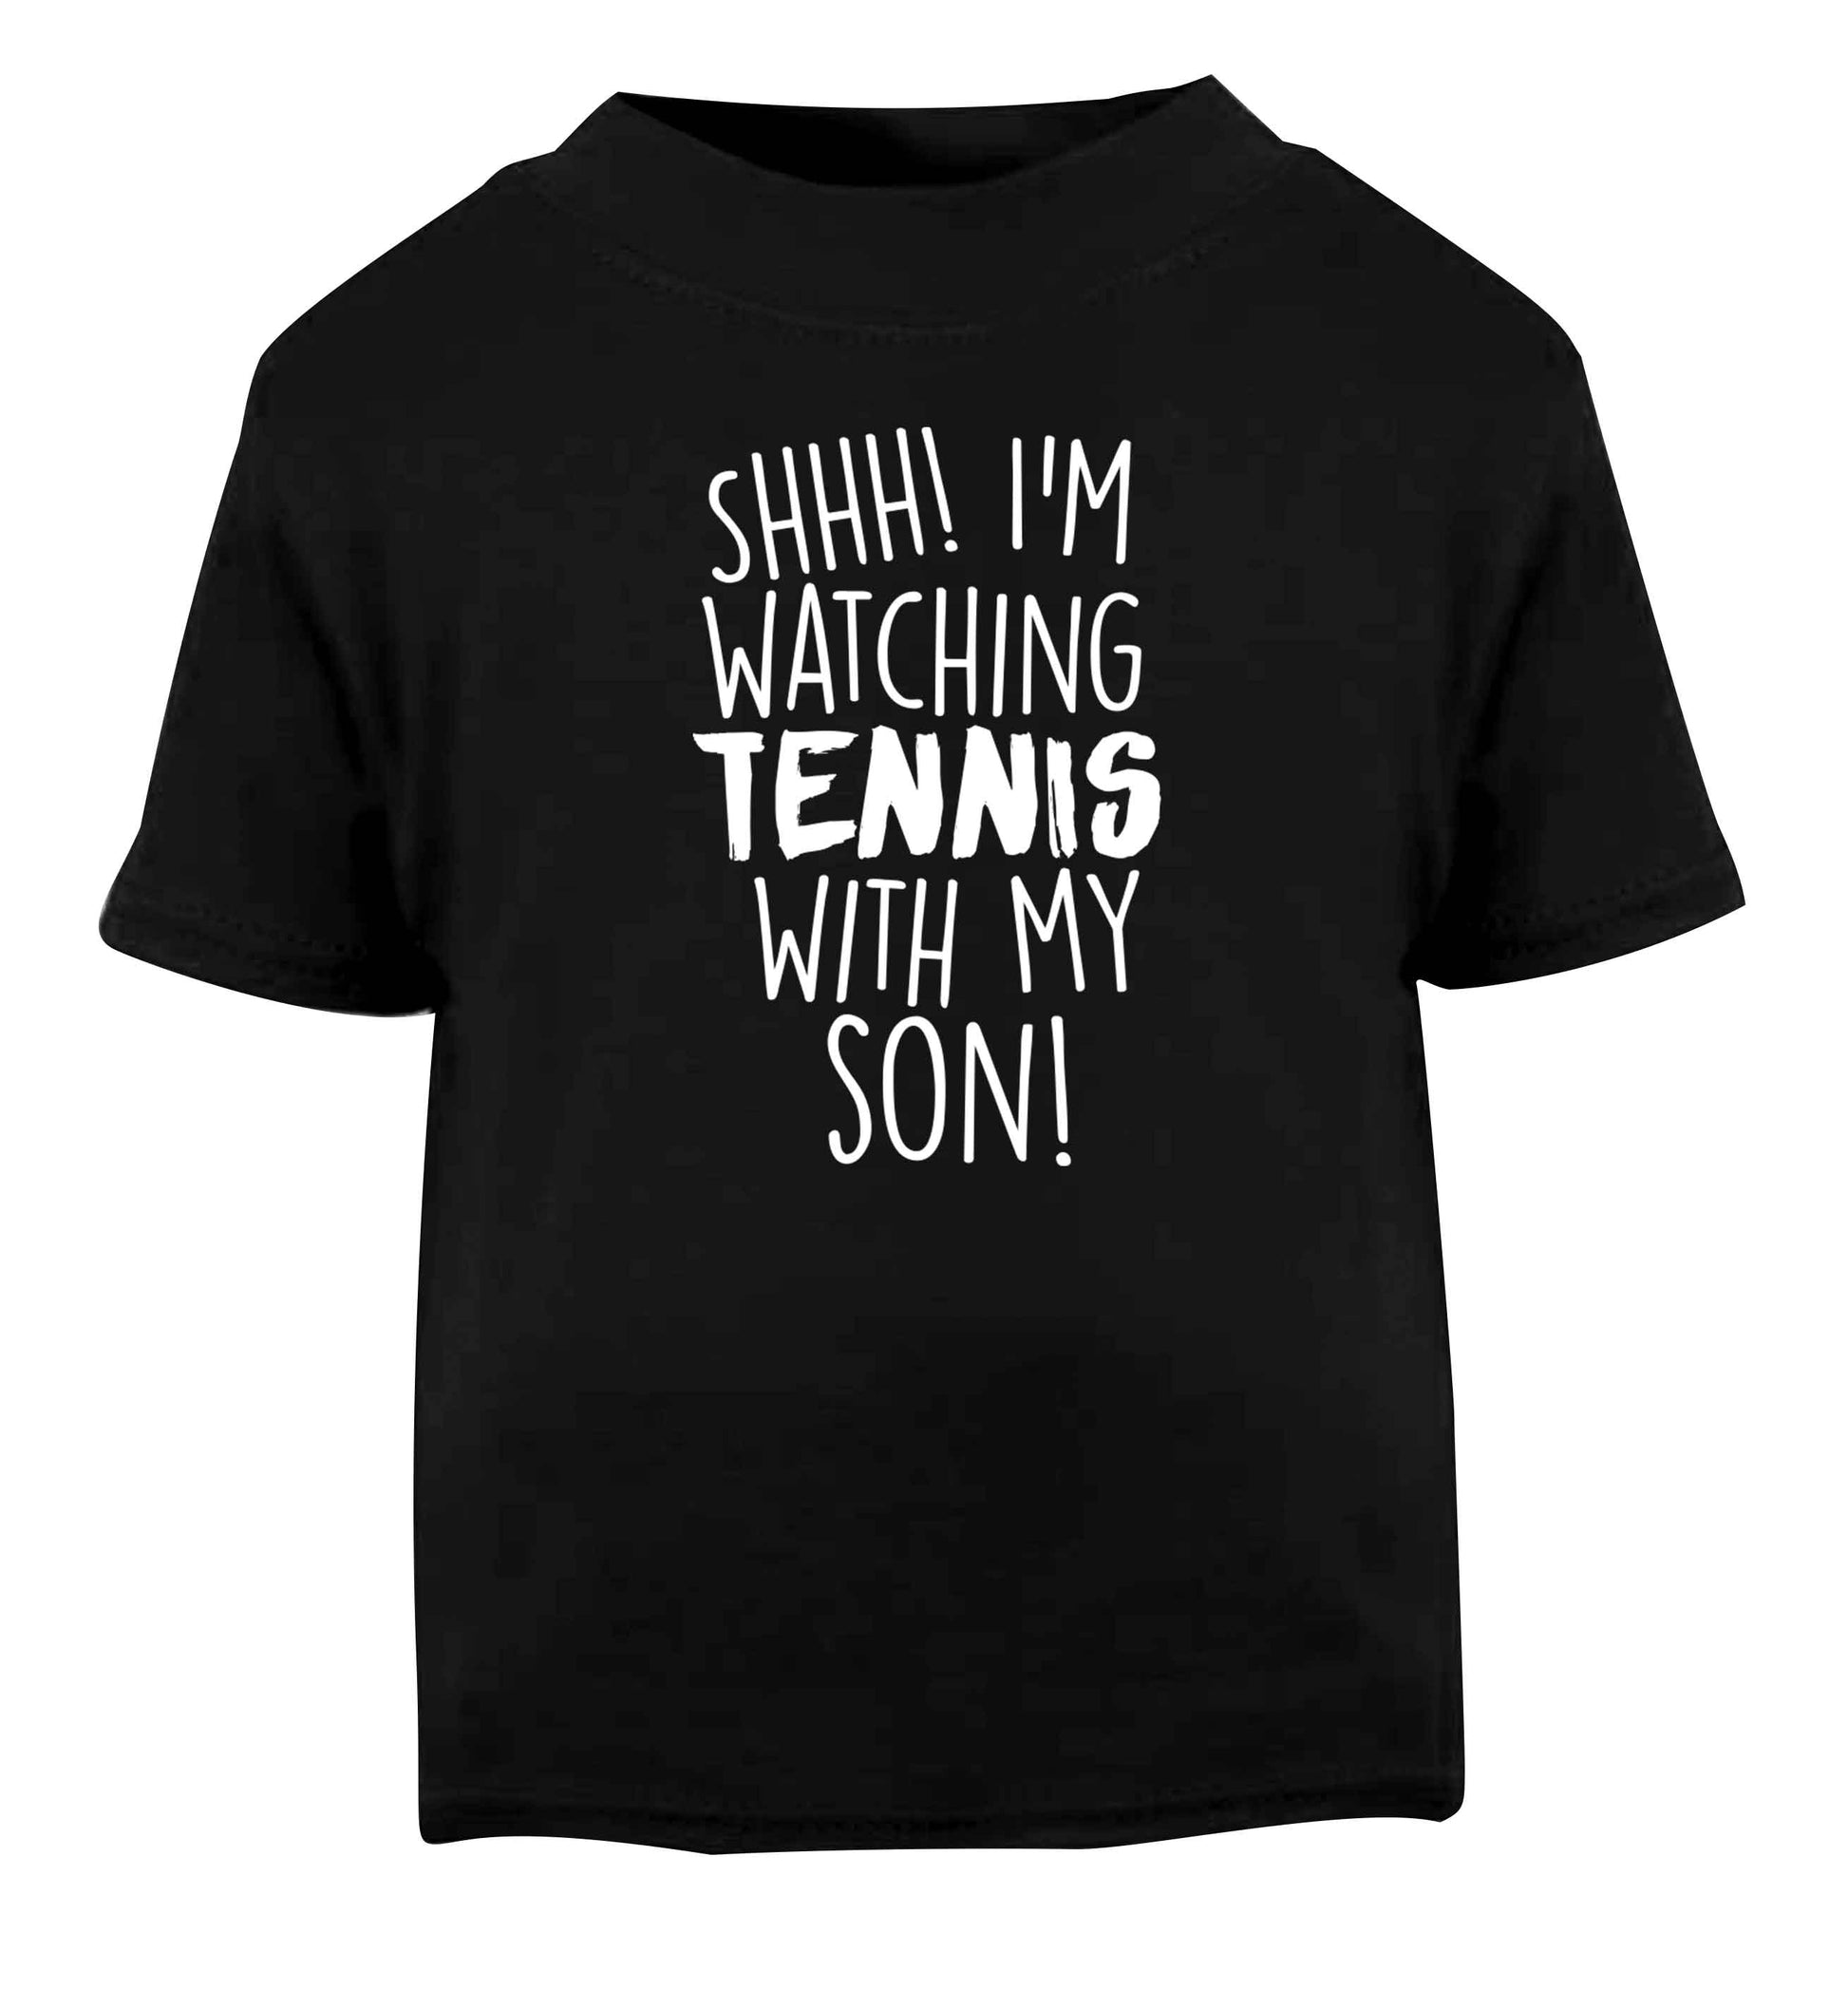 Shh! I'm watching tennis with my son! Black Baby Toddler Tshirt 2 years